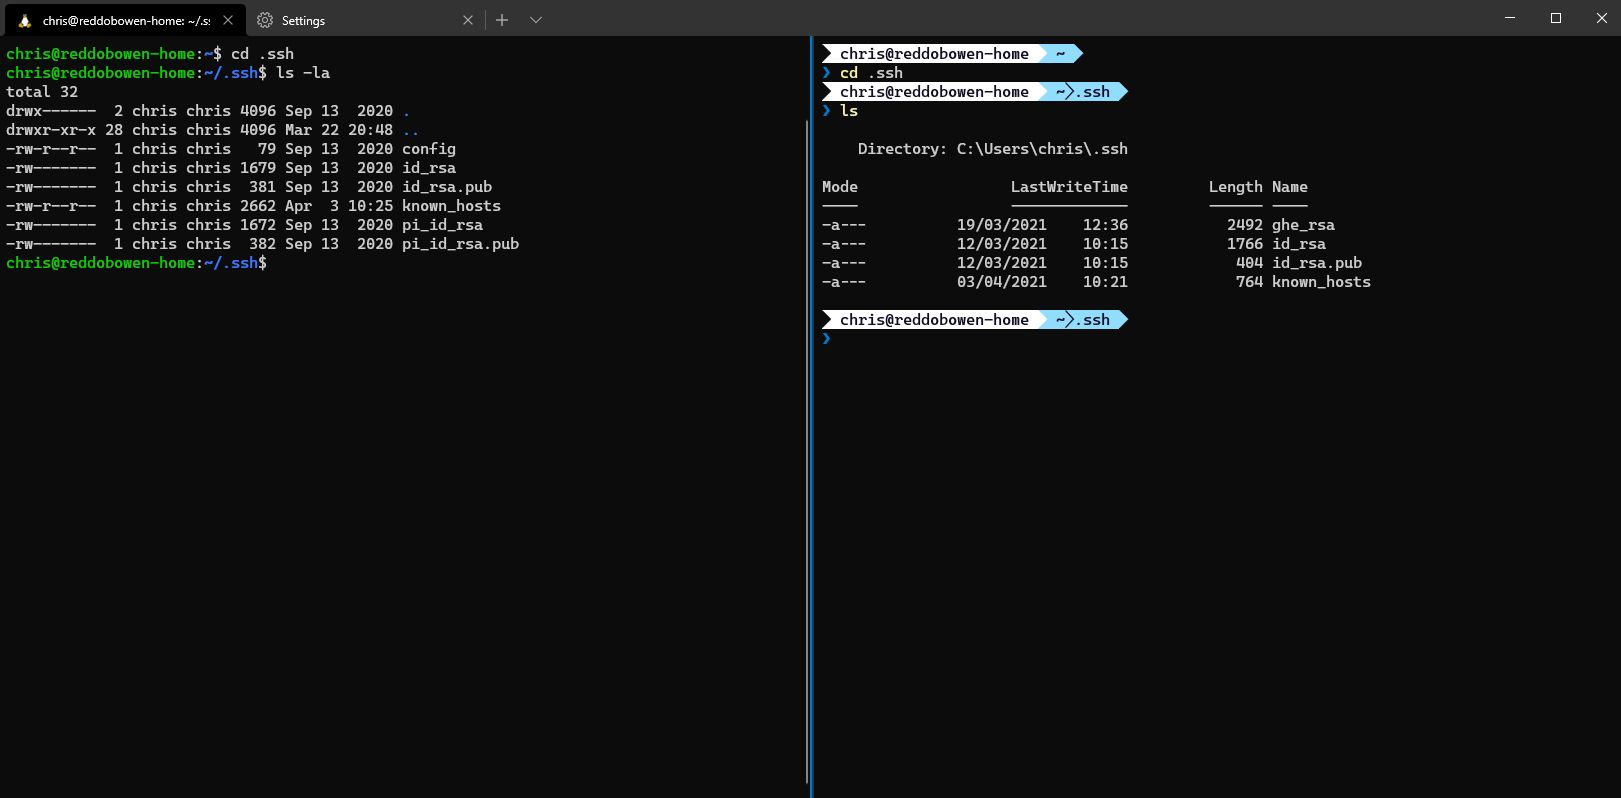 Listing of .ssh directories in WSL and Windows, showing different keys